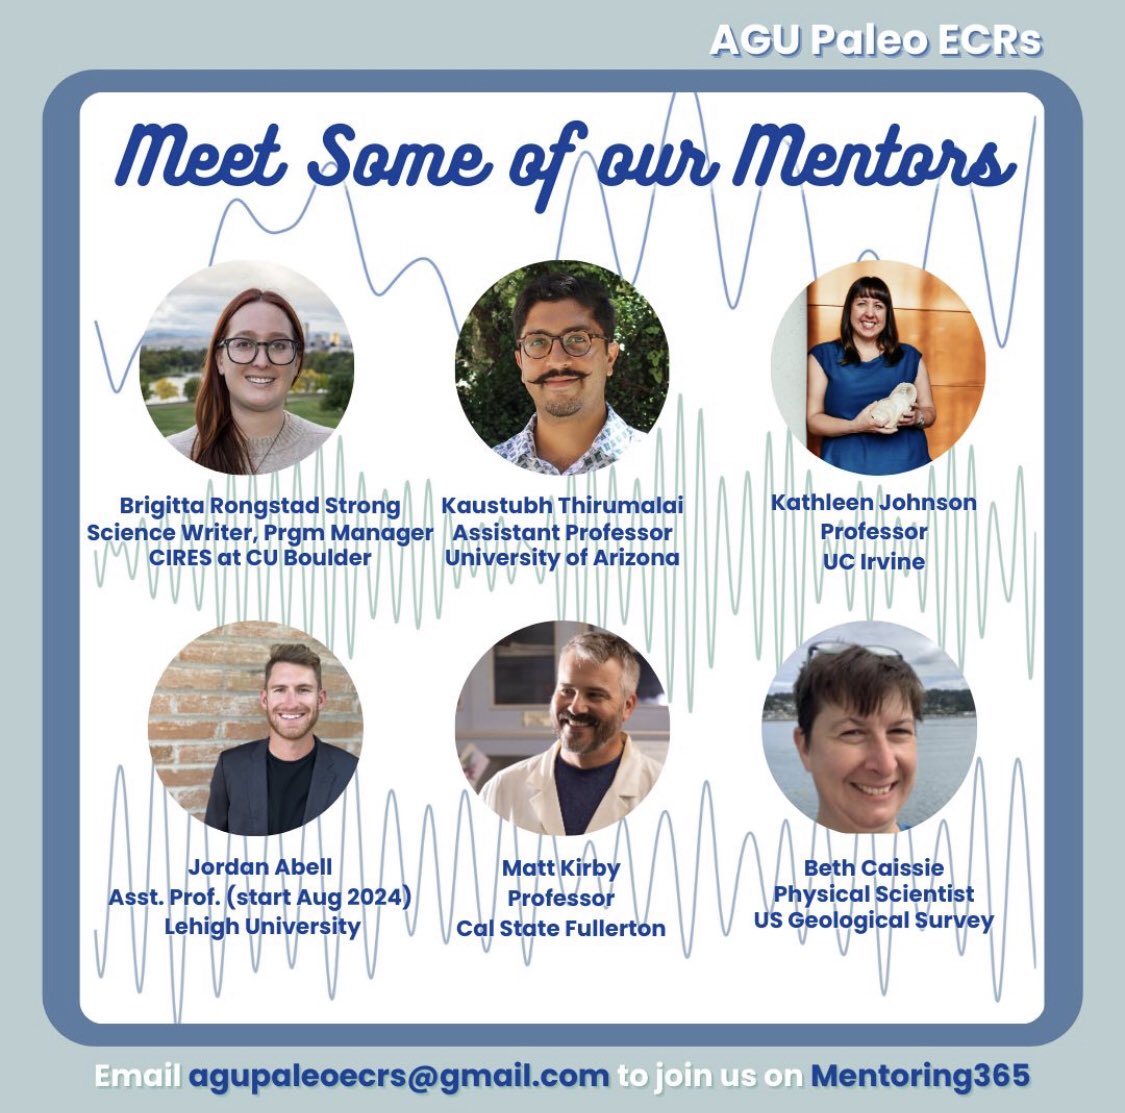 We have an active group on Mentoring365 where you can interact with or serve as one of our amazing mentors 🤩

Email or DM us to join the conversation now and stay tuned for details on a virtual networking event coming up next month!